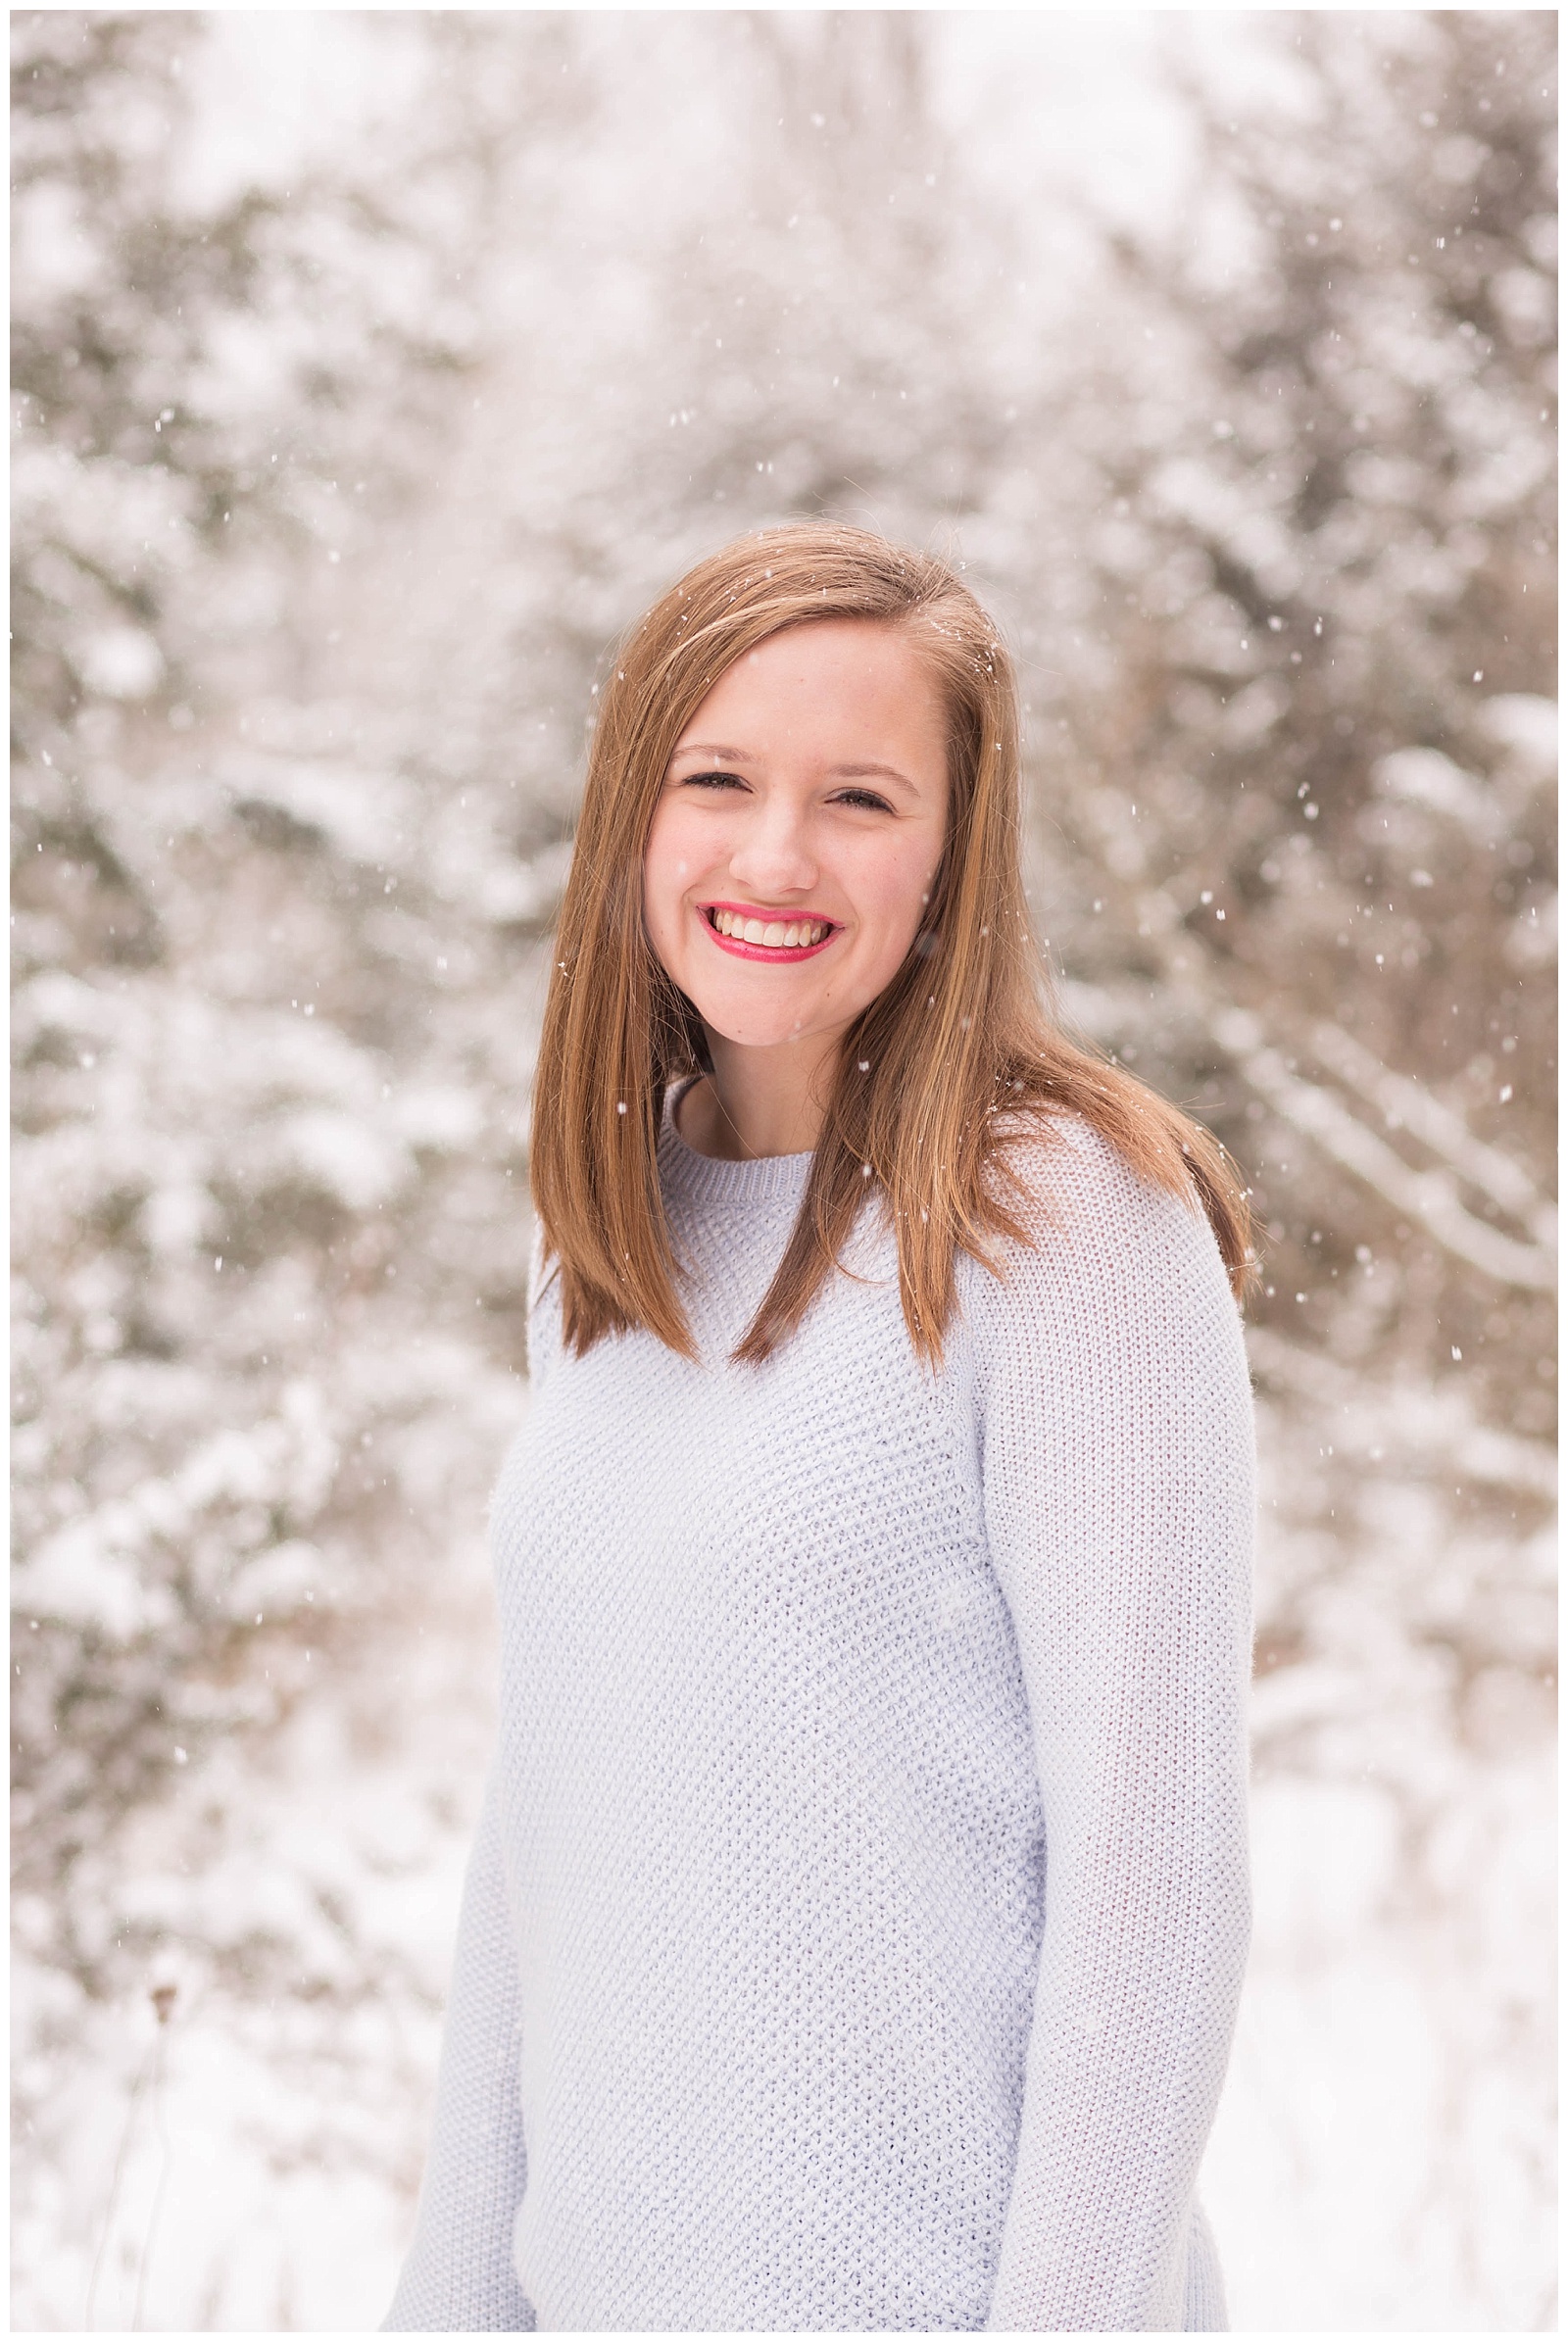 Winter Senior Session in the Snow | Monica Brown Photography | Indianapolis, Ohio, and Destination Photographer | monicabrownphoto.com